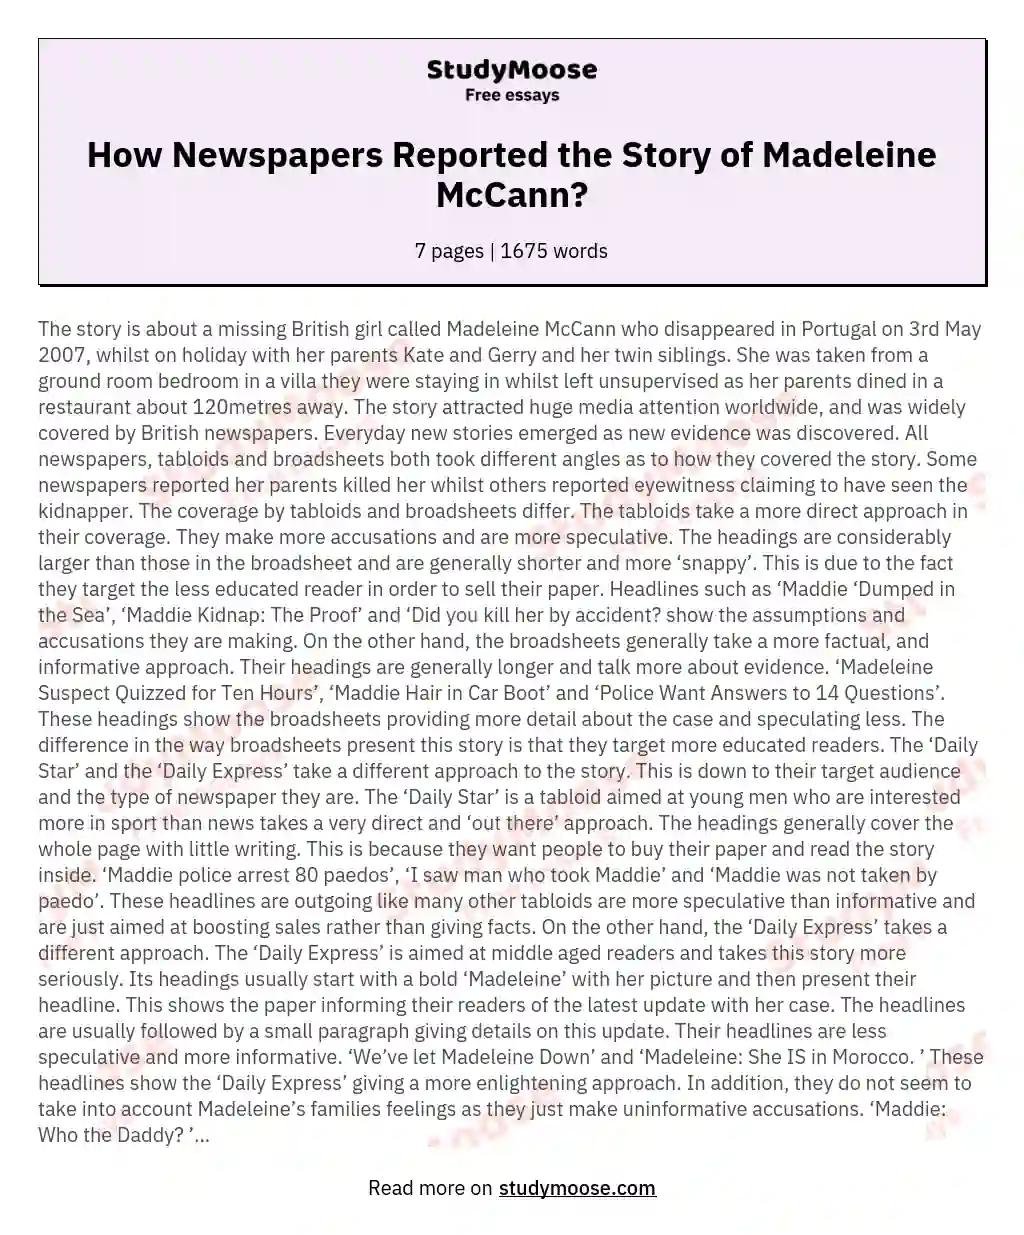 How Newspapers Reported the Story of Madeleine McCann? essay